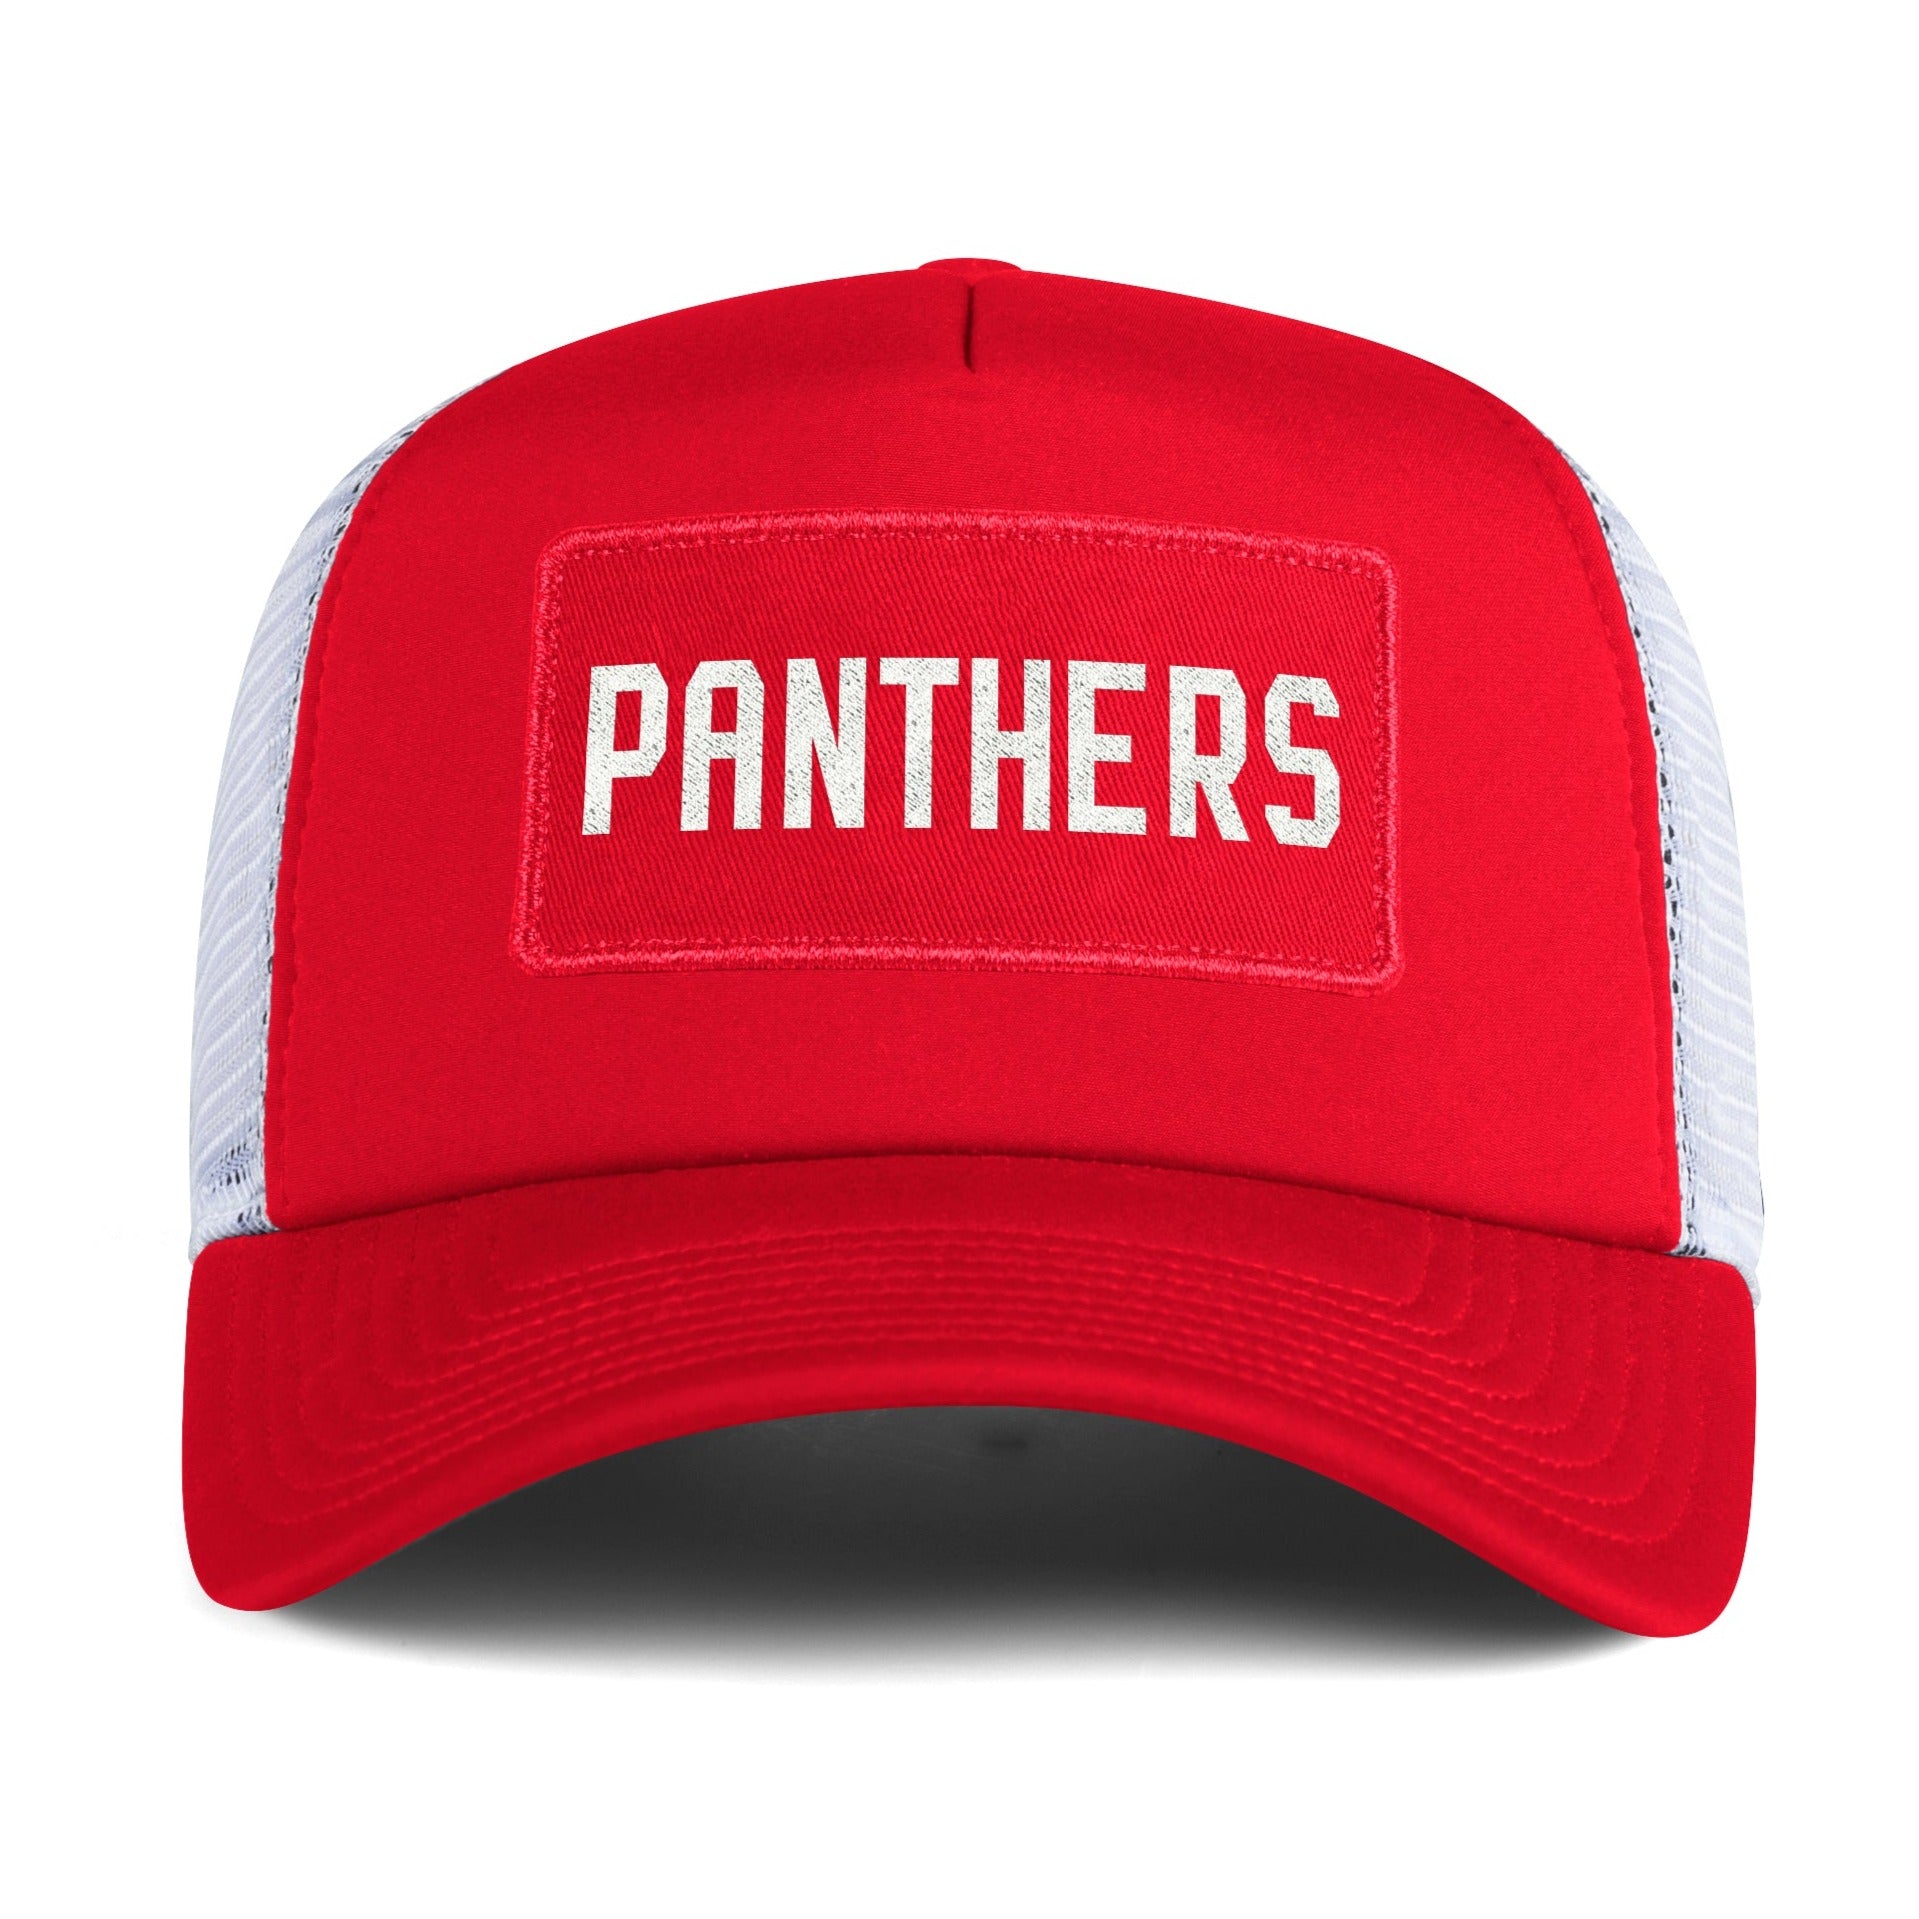 Florida Panthers adidas Panthers Patch Team Foam Trucker Hat - Red/White